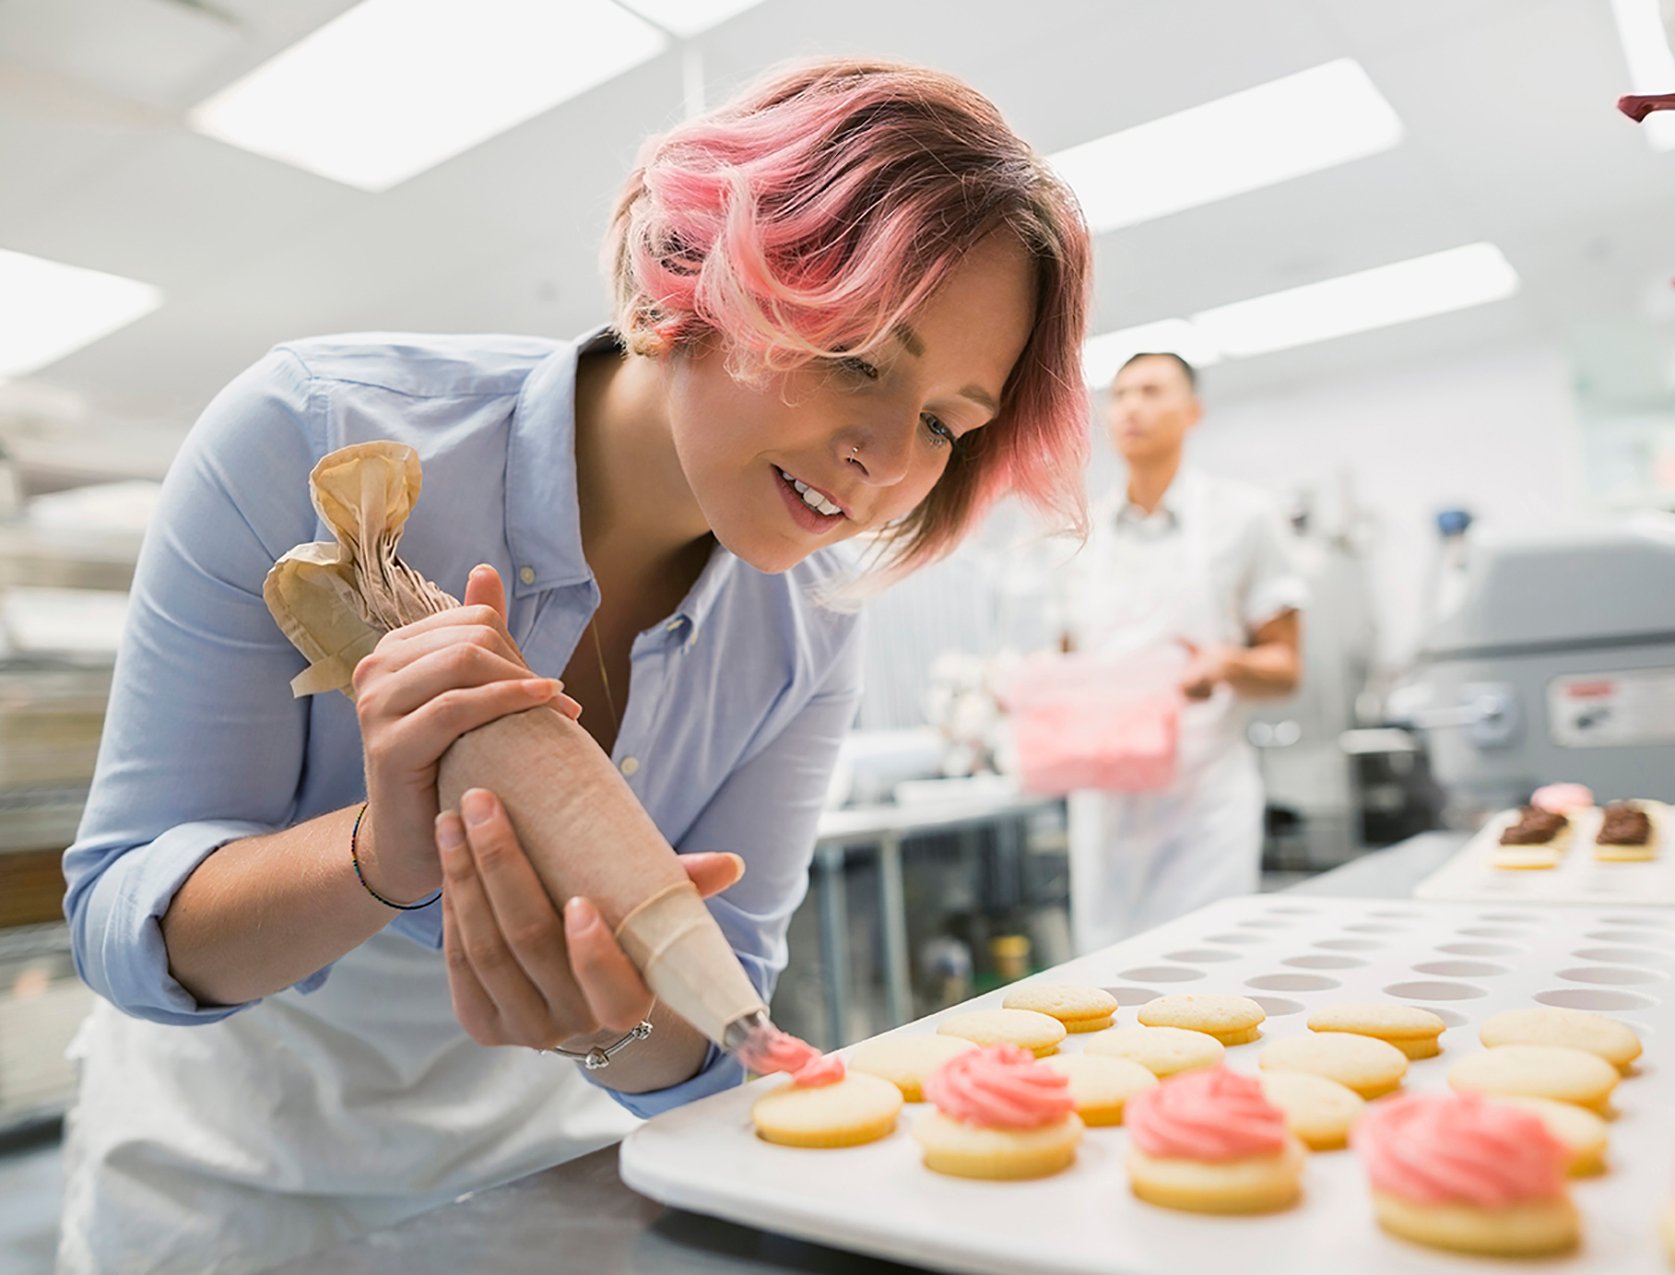 Pastry chef piping cookies with pink icing in a commercial kitchen